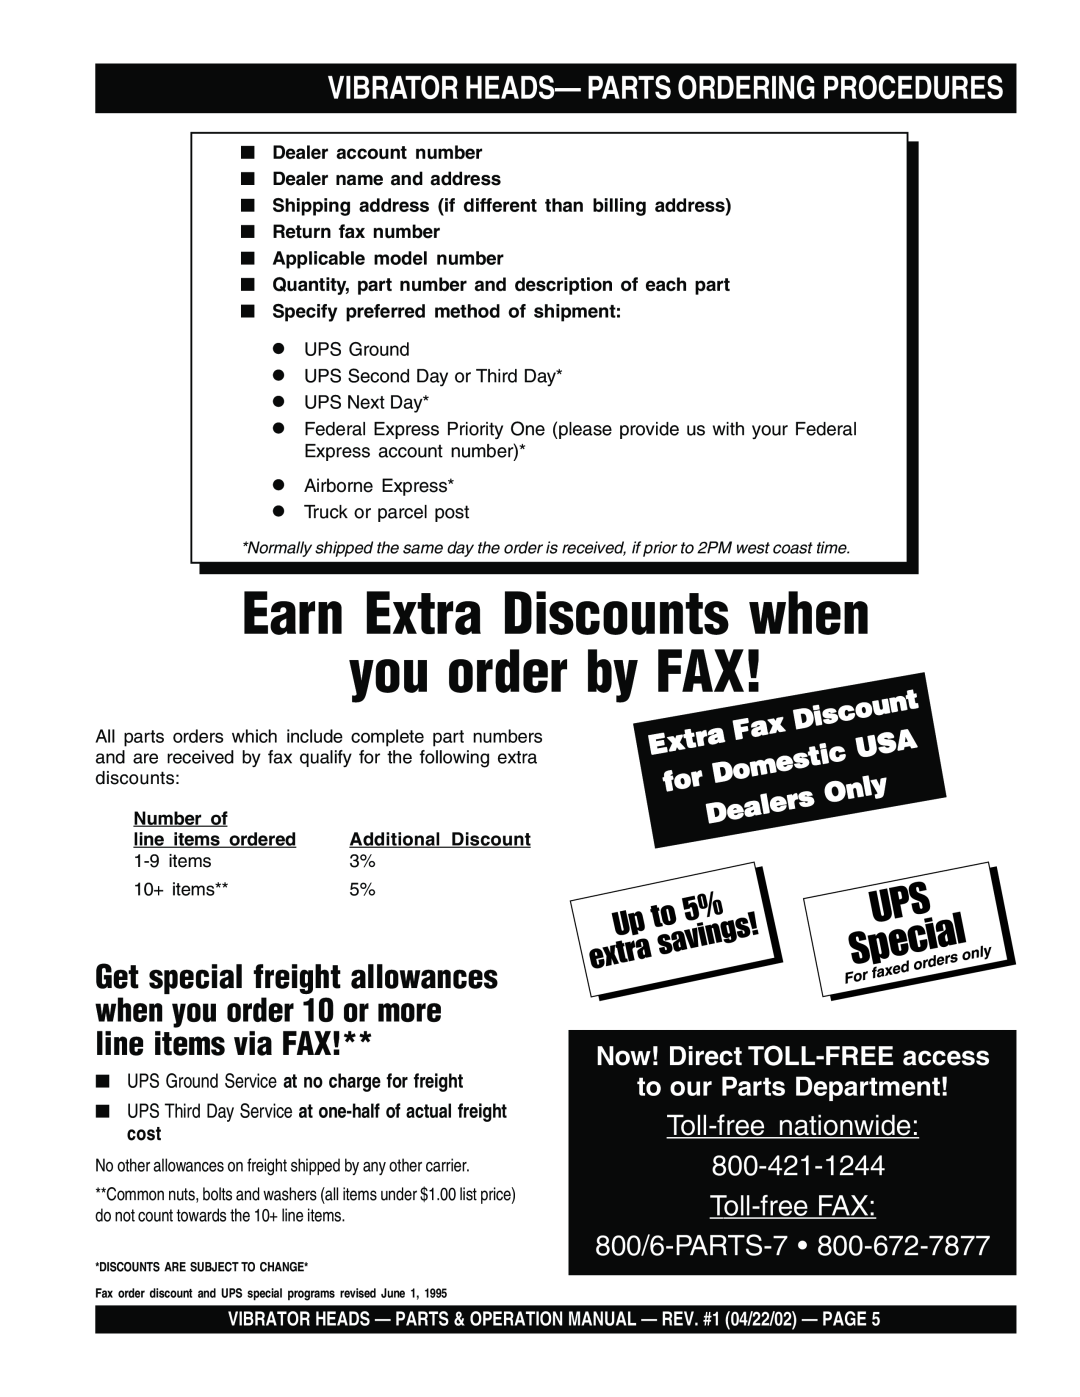 Stow 1400 Earn Extra Discounts when you order by FAX, Vibrator Heads- Parts Ordering Procedures, Domestic, Only, Dealers 